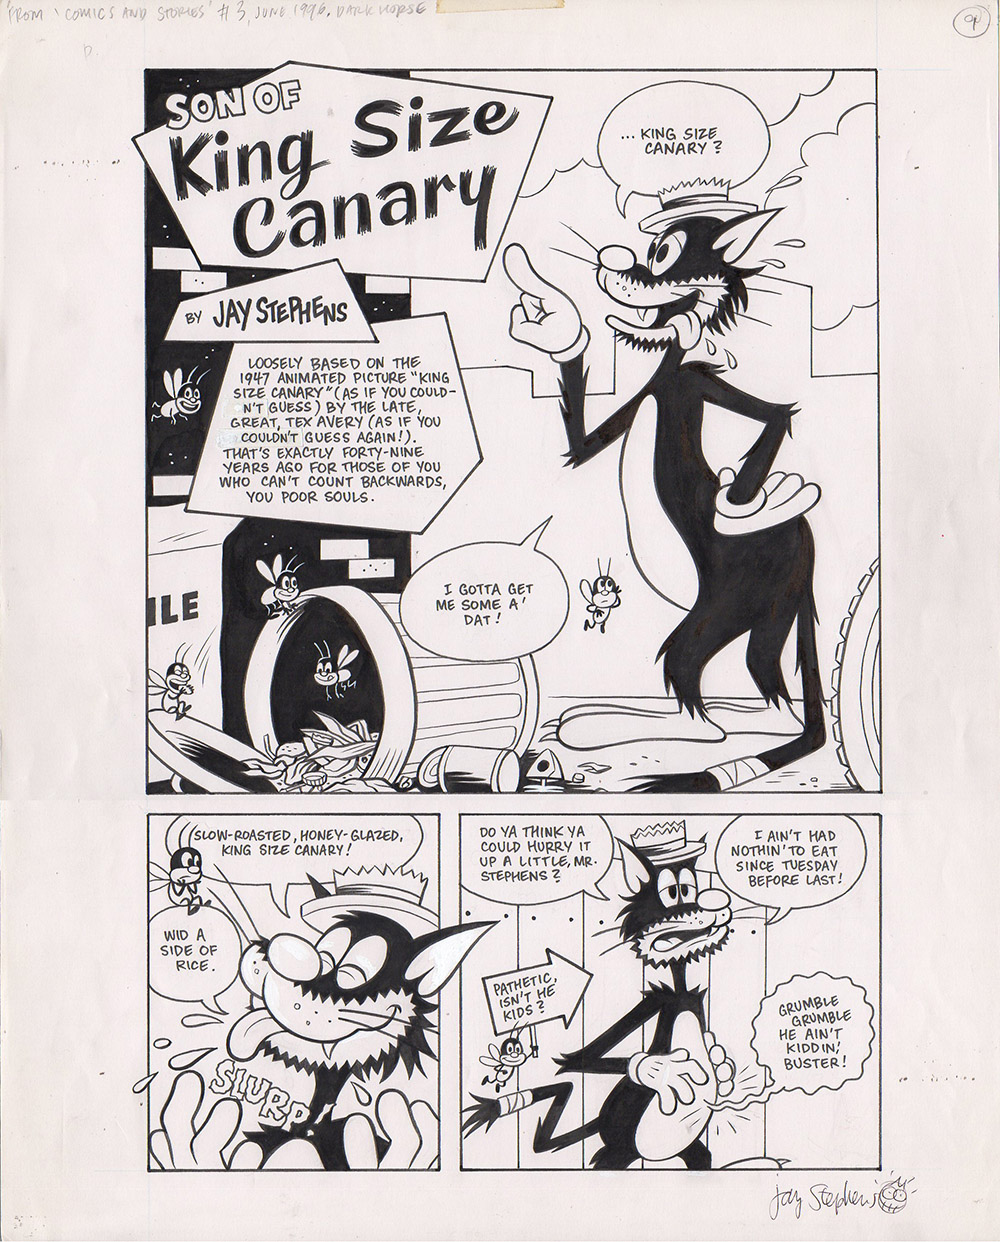 Son of King Size Canary pages 1-8